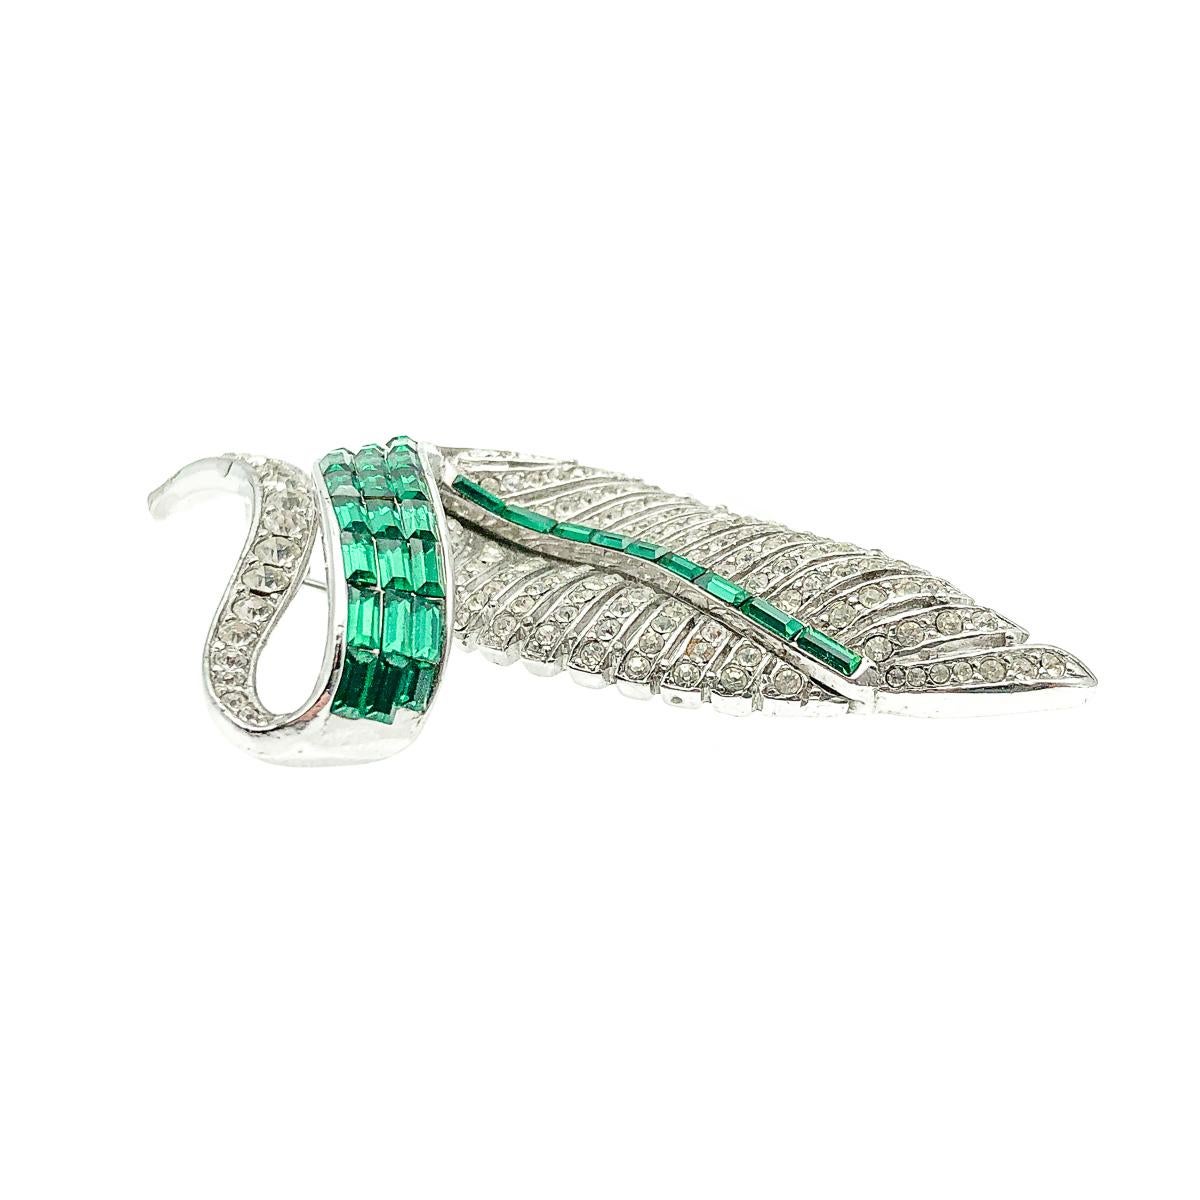 An enchanting Vintage Emerald Leaf Brooch dating to the 1950s. Featuring a deco inspired design of an undulating leaf, the many veins of which are studded with twinkling chaton crystals. Verdant emerald crystals further accentuate and trace the